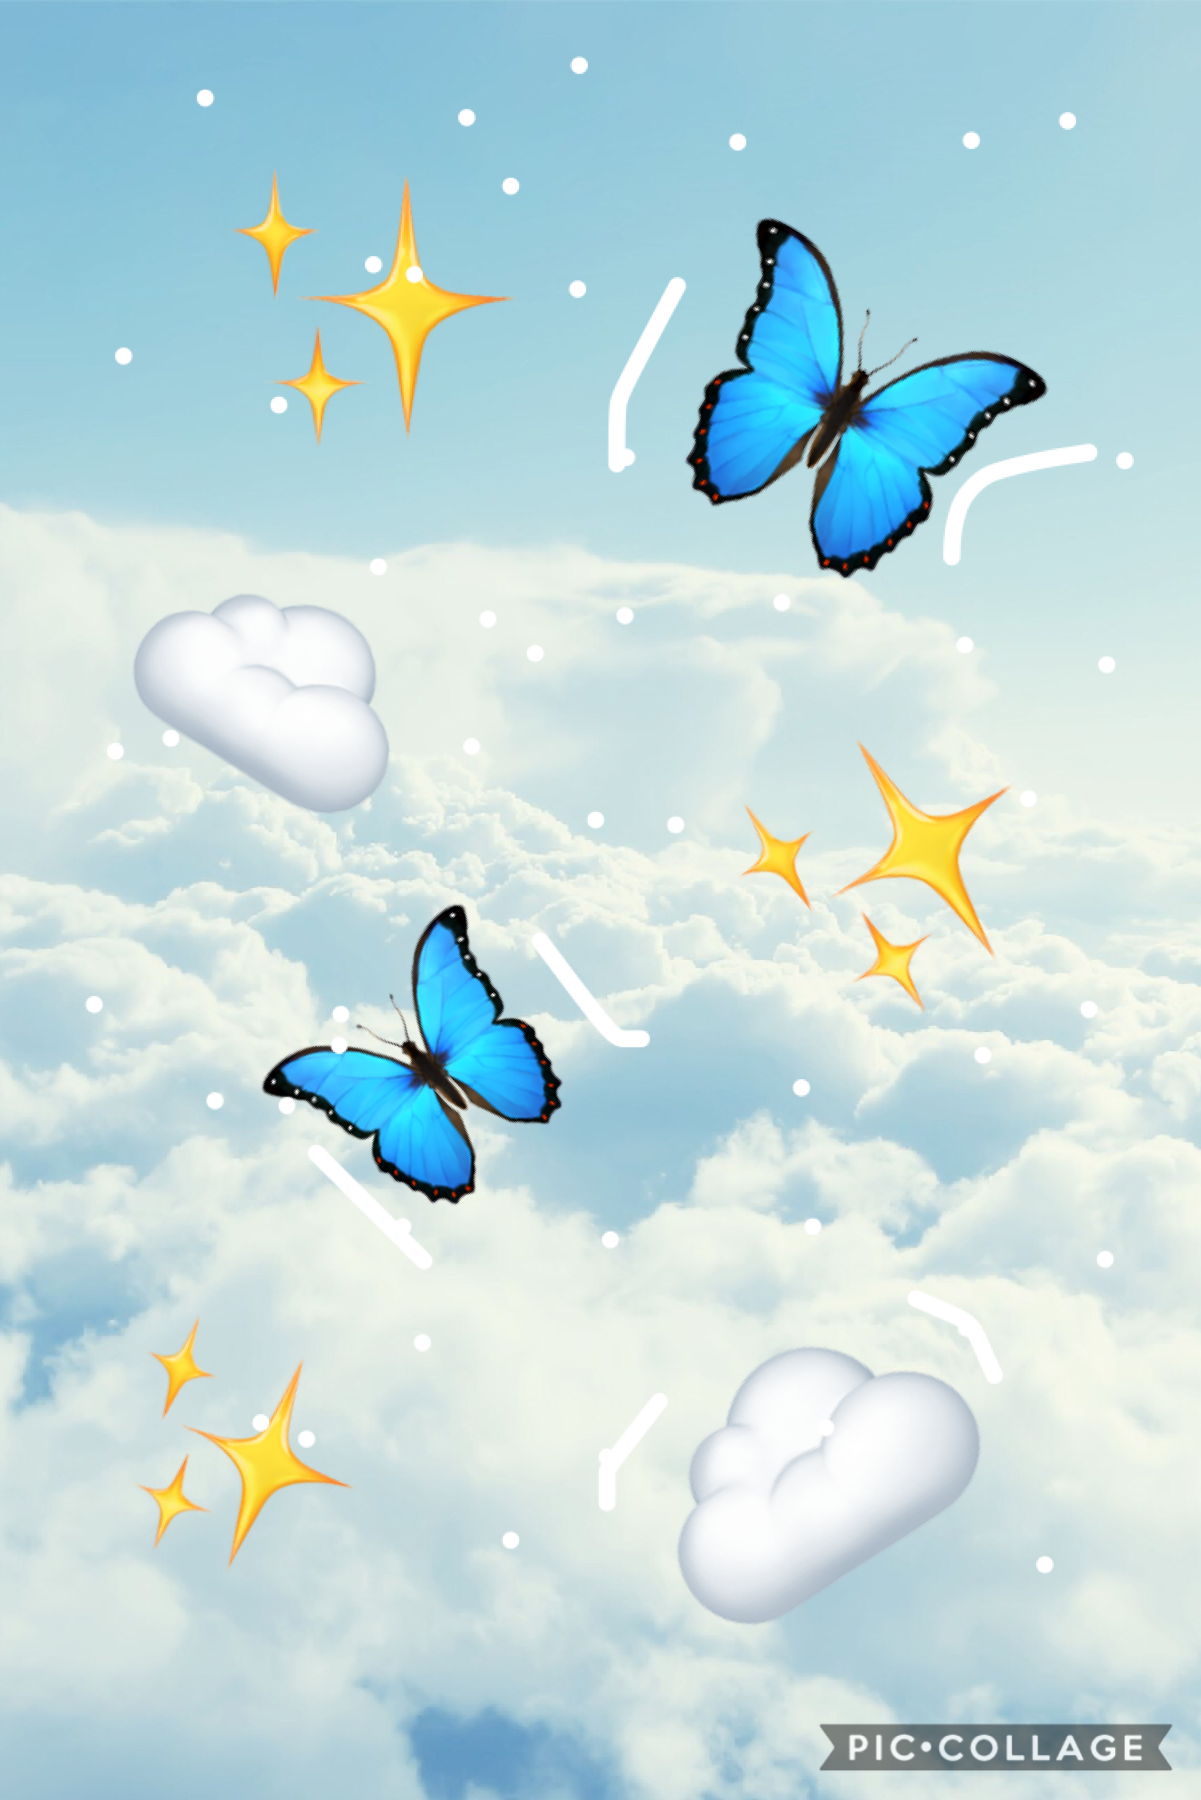 ✨🦋Tap🦋✨


I am bored so I did this it’s 11:03 exactly and ye I love it its simple and yet still nice night 😊😊😴😴